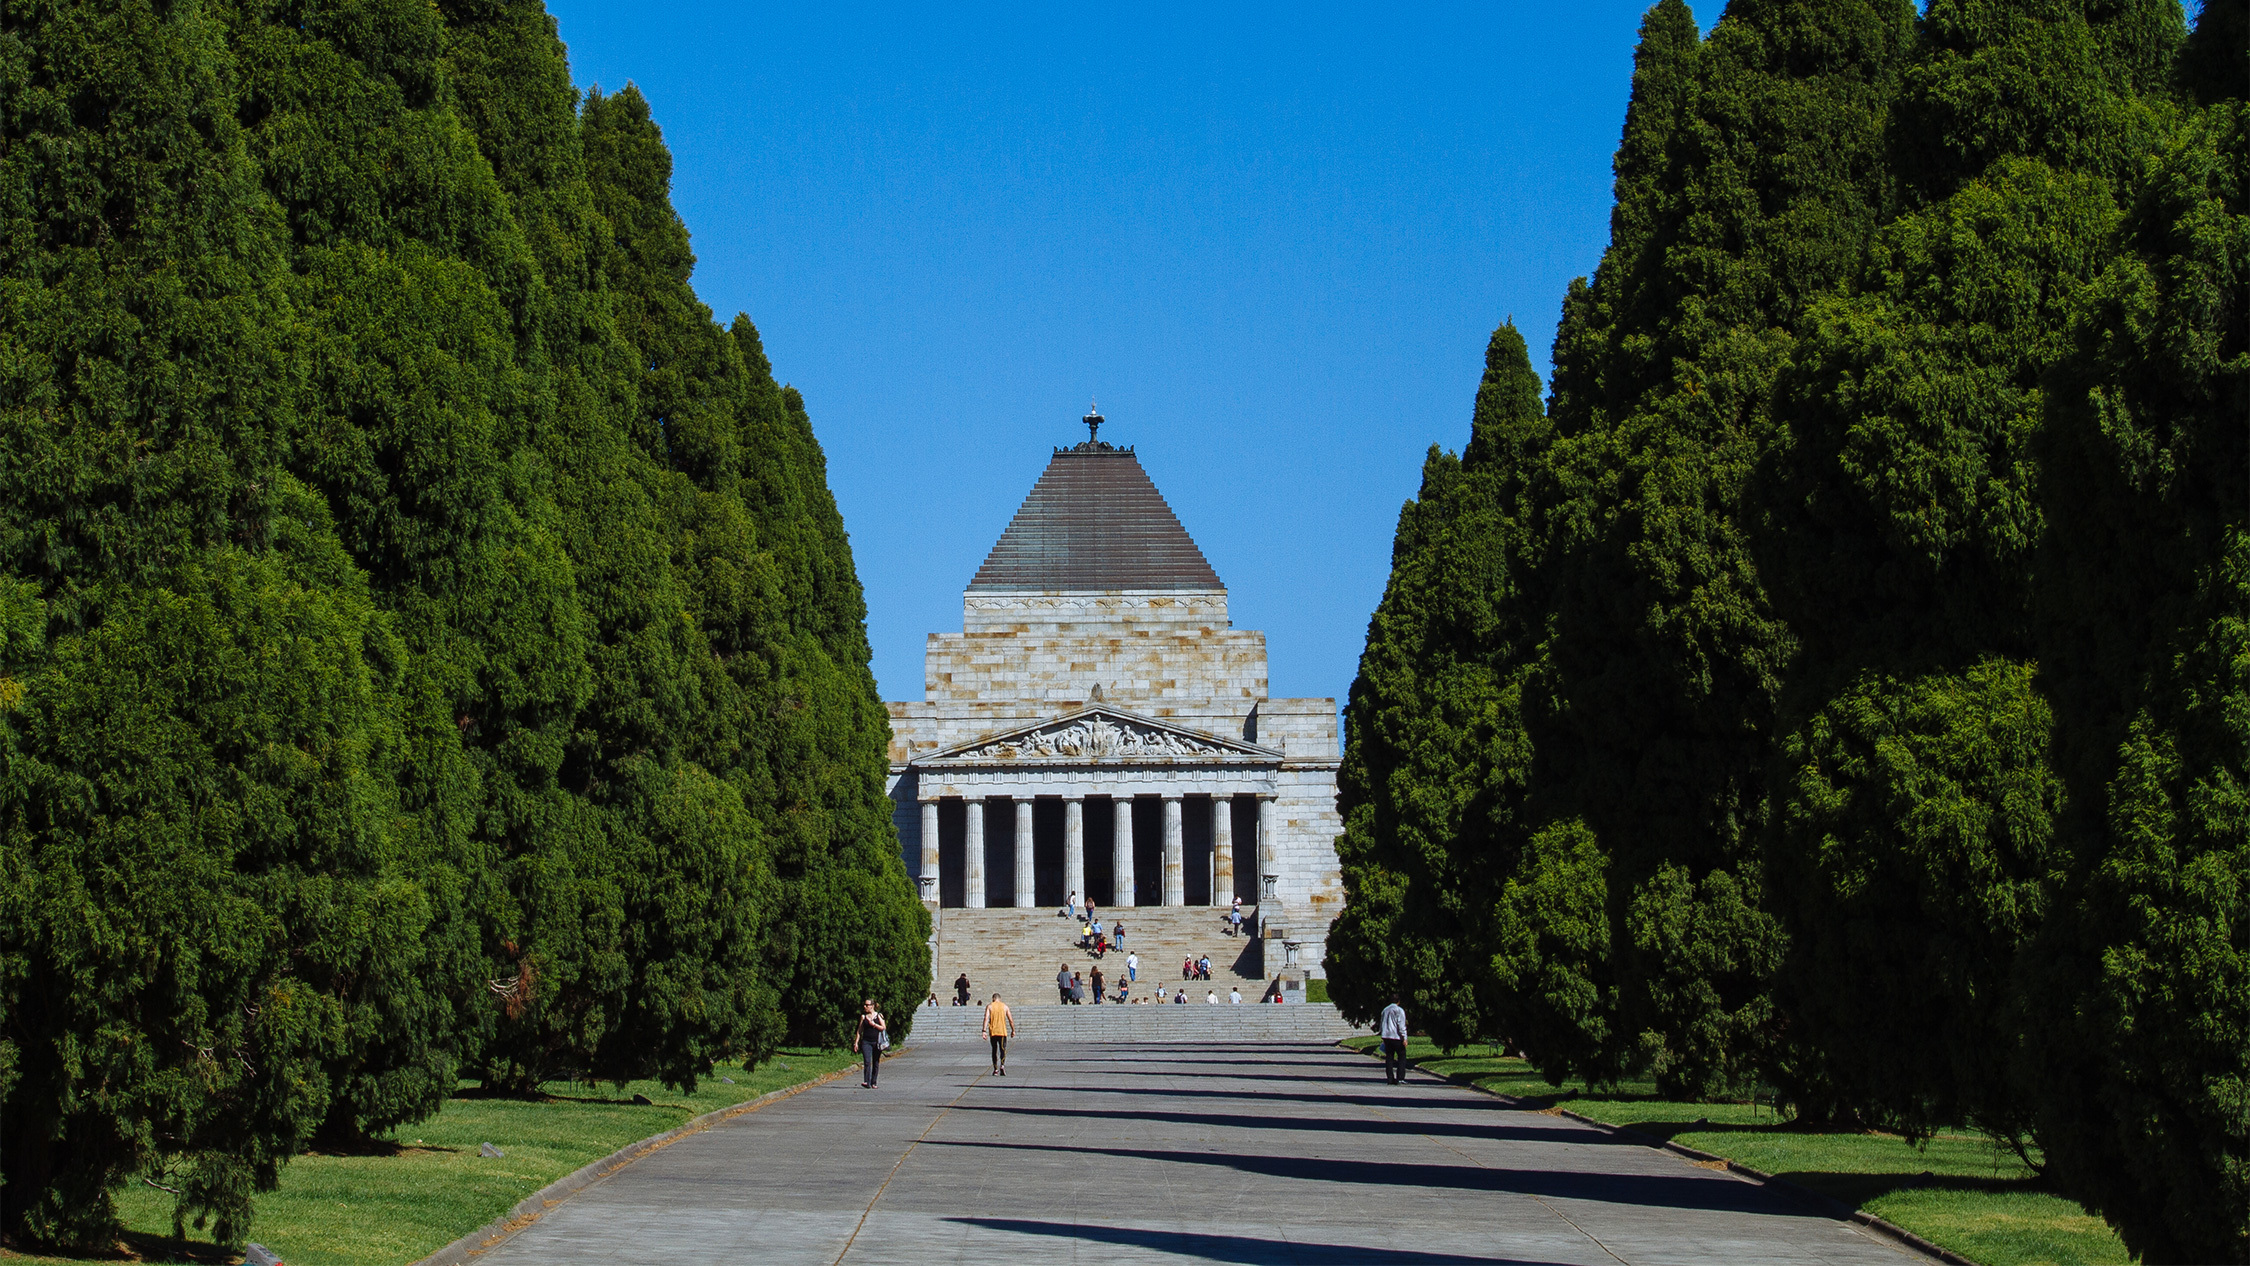 The Shrine of Remembrance | Museums in Melbourne, Melbourne